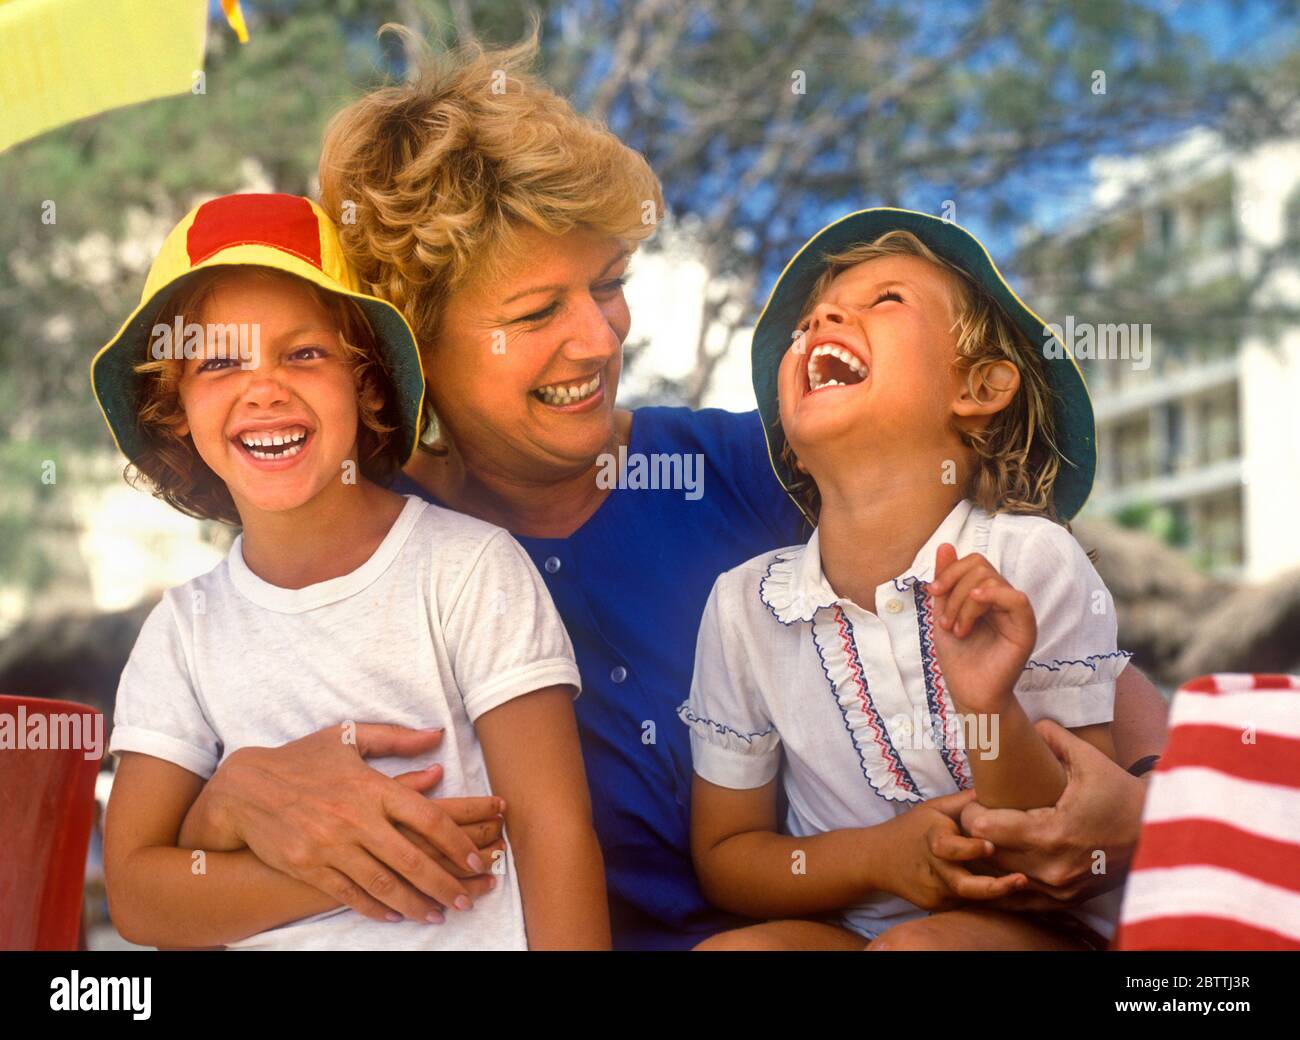 Mother and two daughters 5-7 years sitting outside and laughing together on family holiday in sunny situation Kodak moment advert Ian Shaw Kodak Photographer Stock Photo